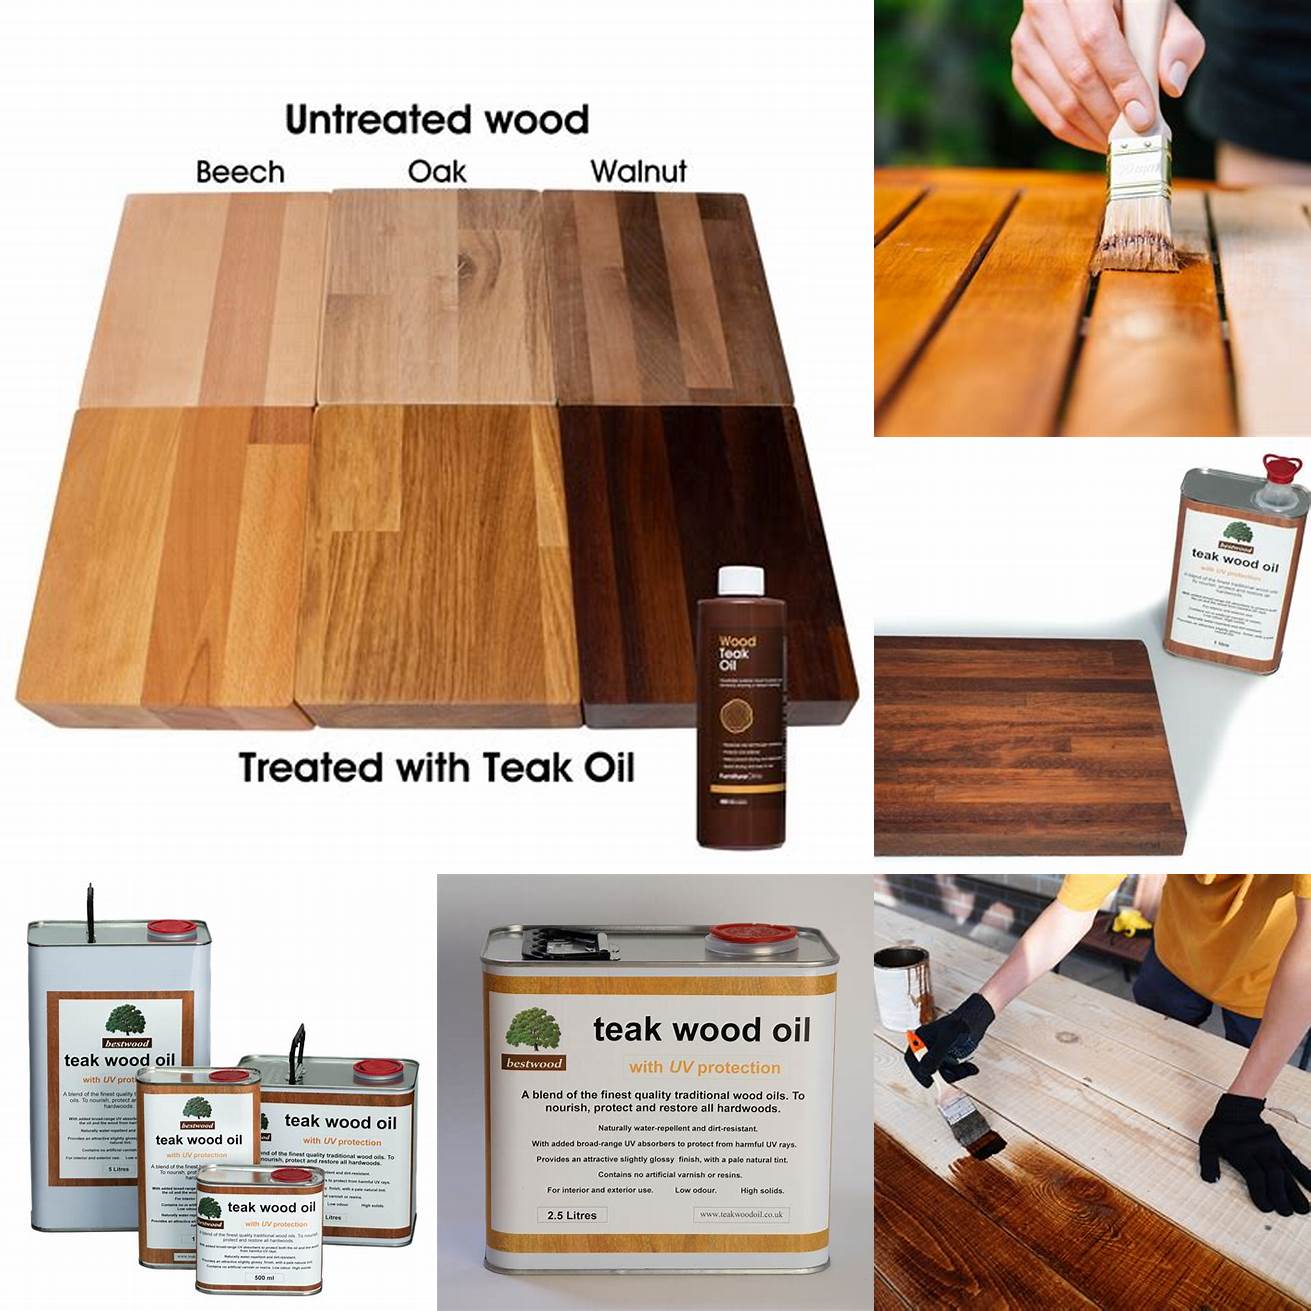 Teak wood oil being applied to different types of wood